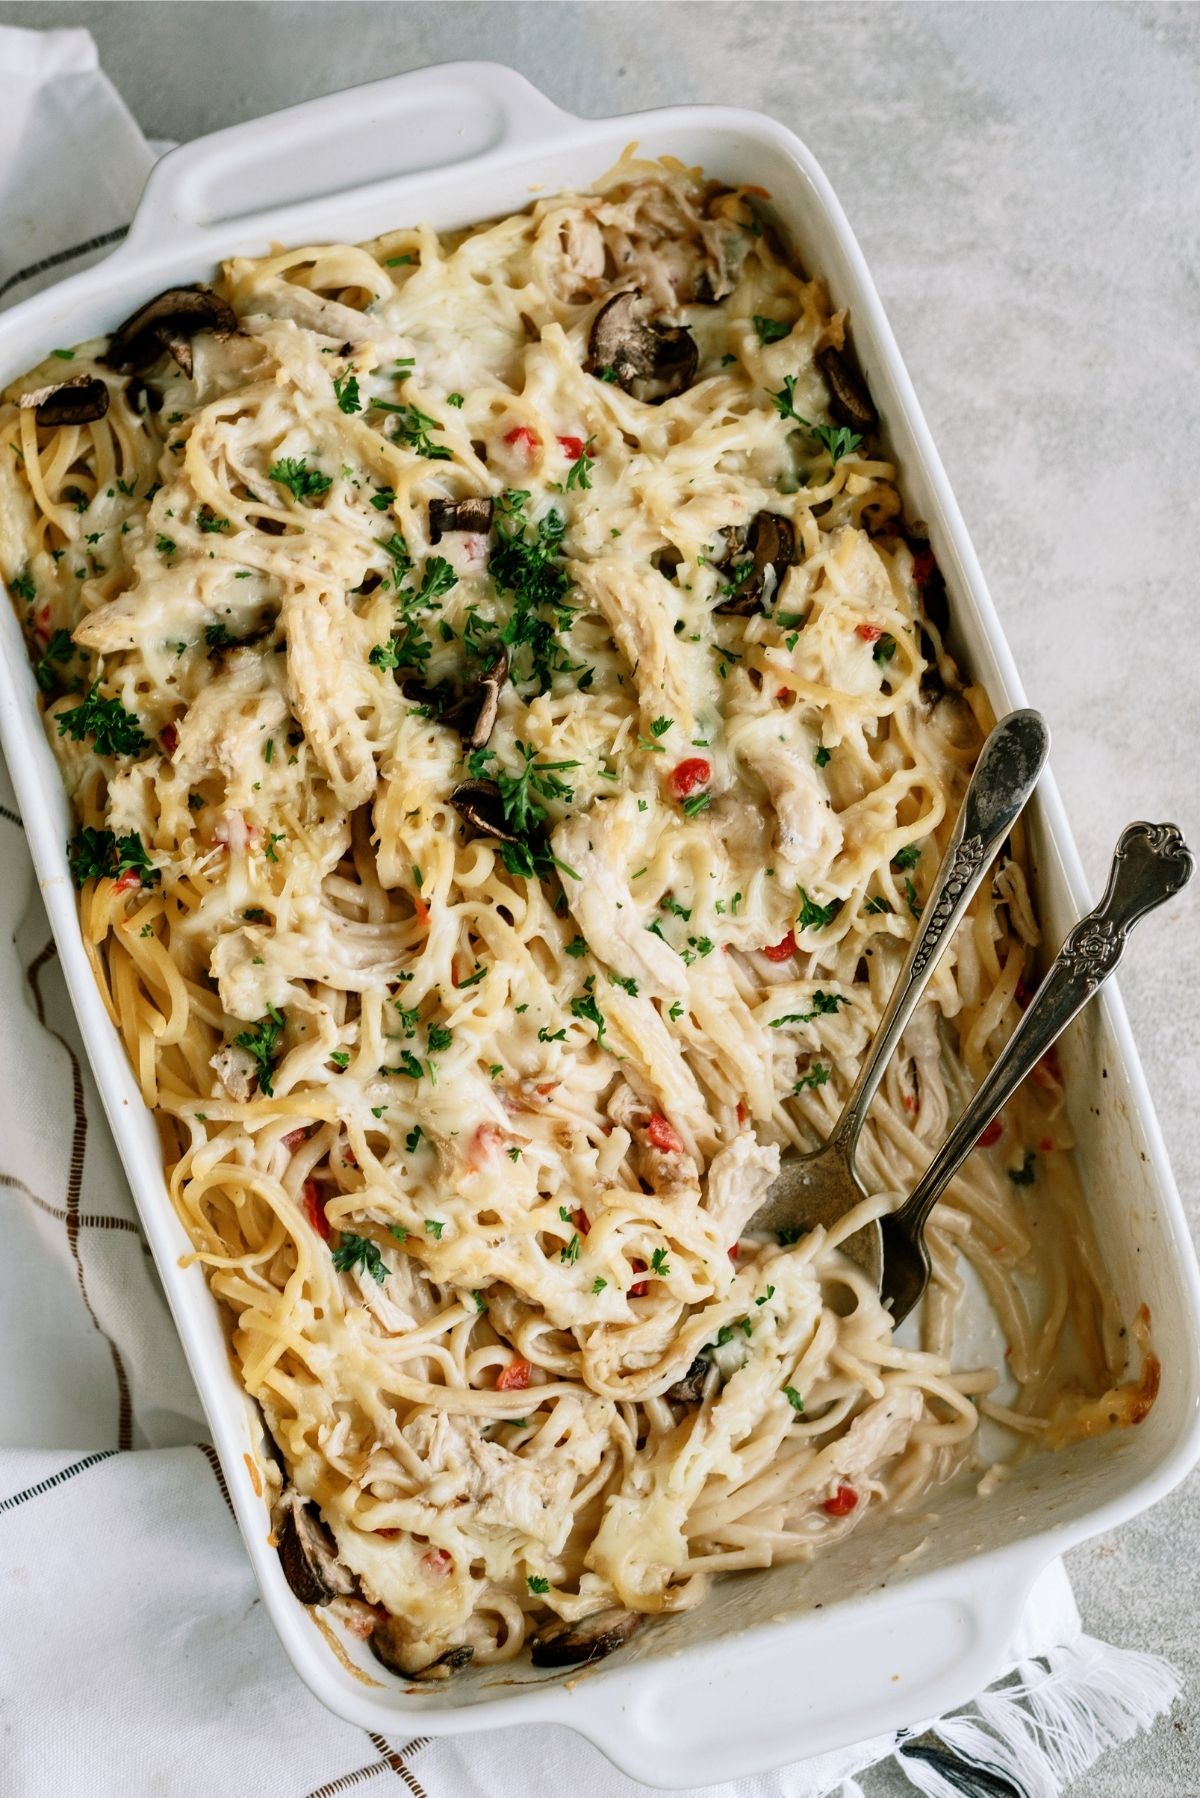 Baked Chicken Tetrazzini Casserole in baking dish with serving utensils